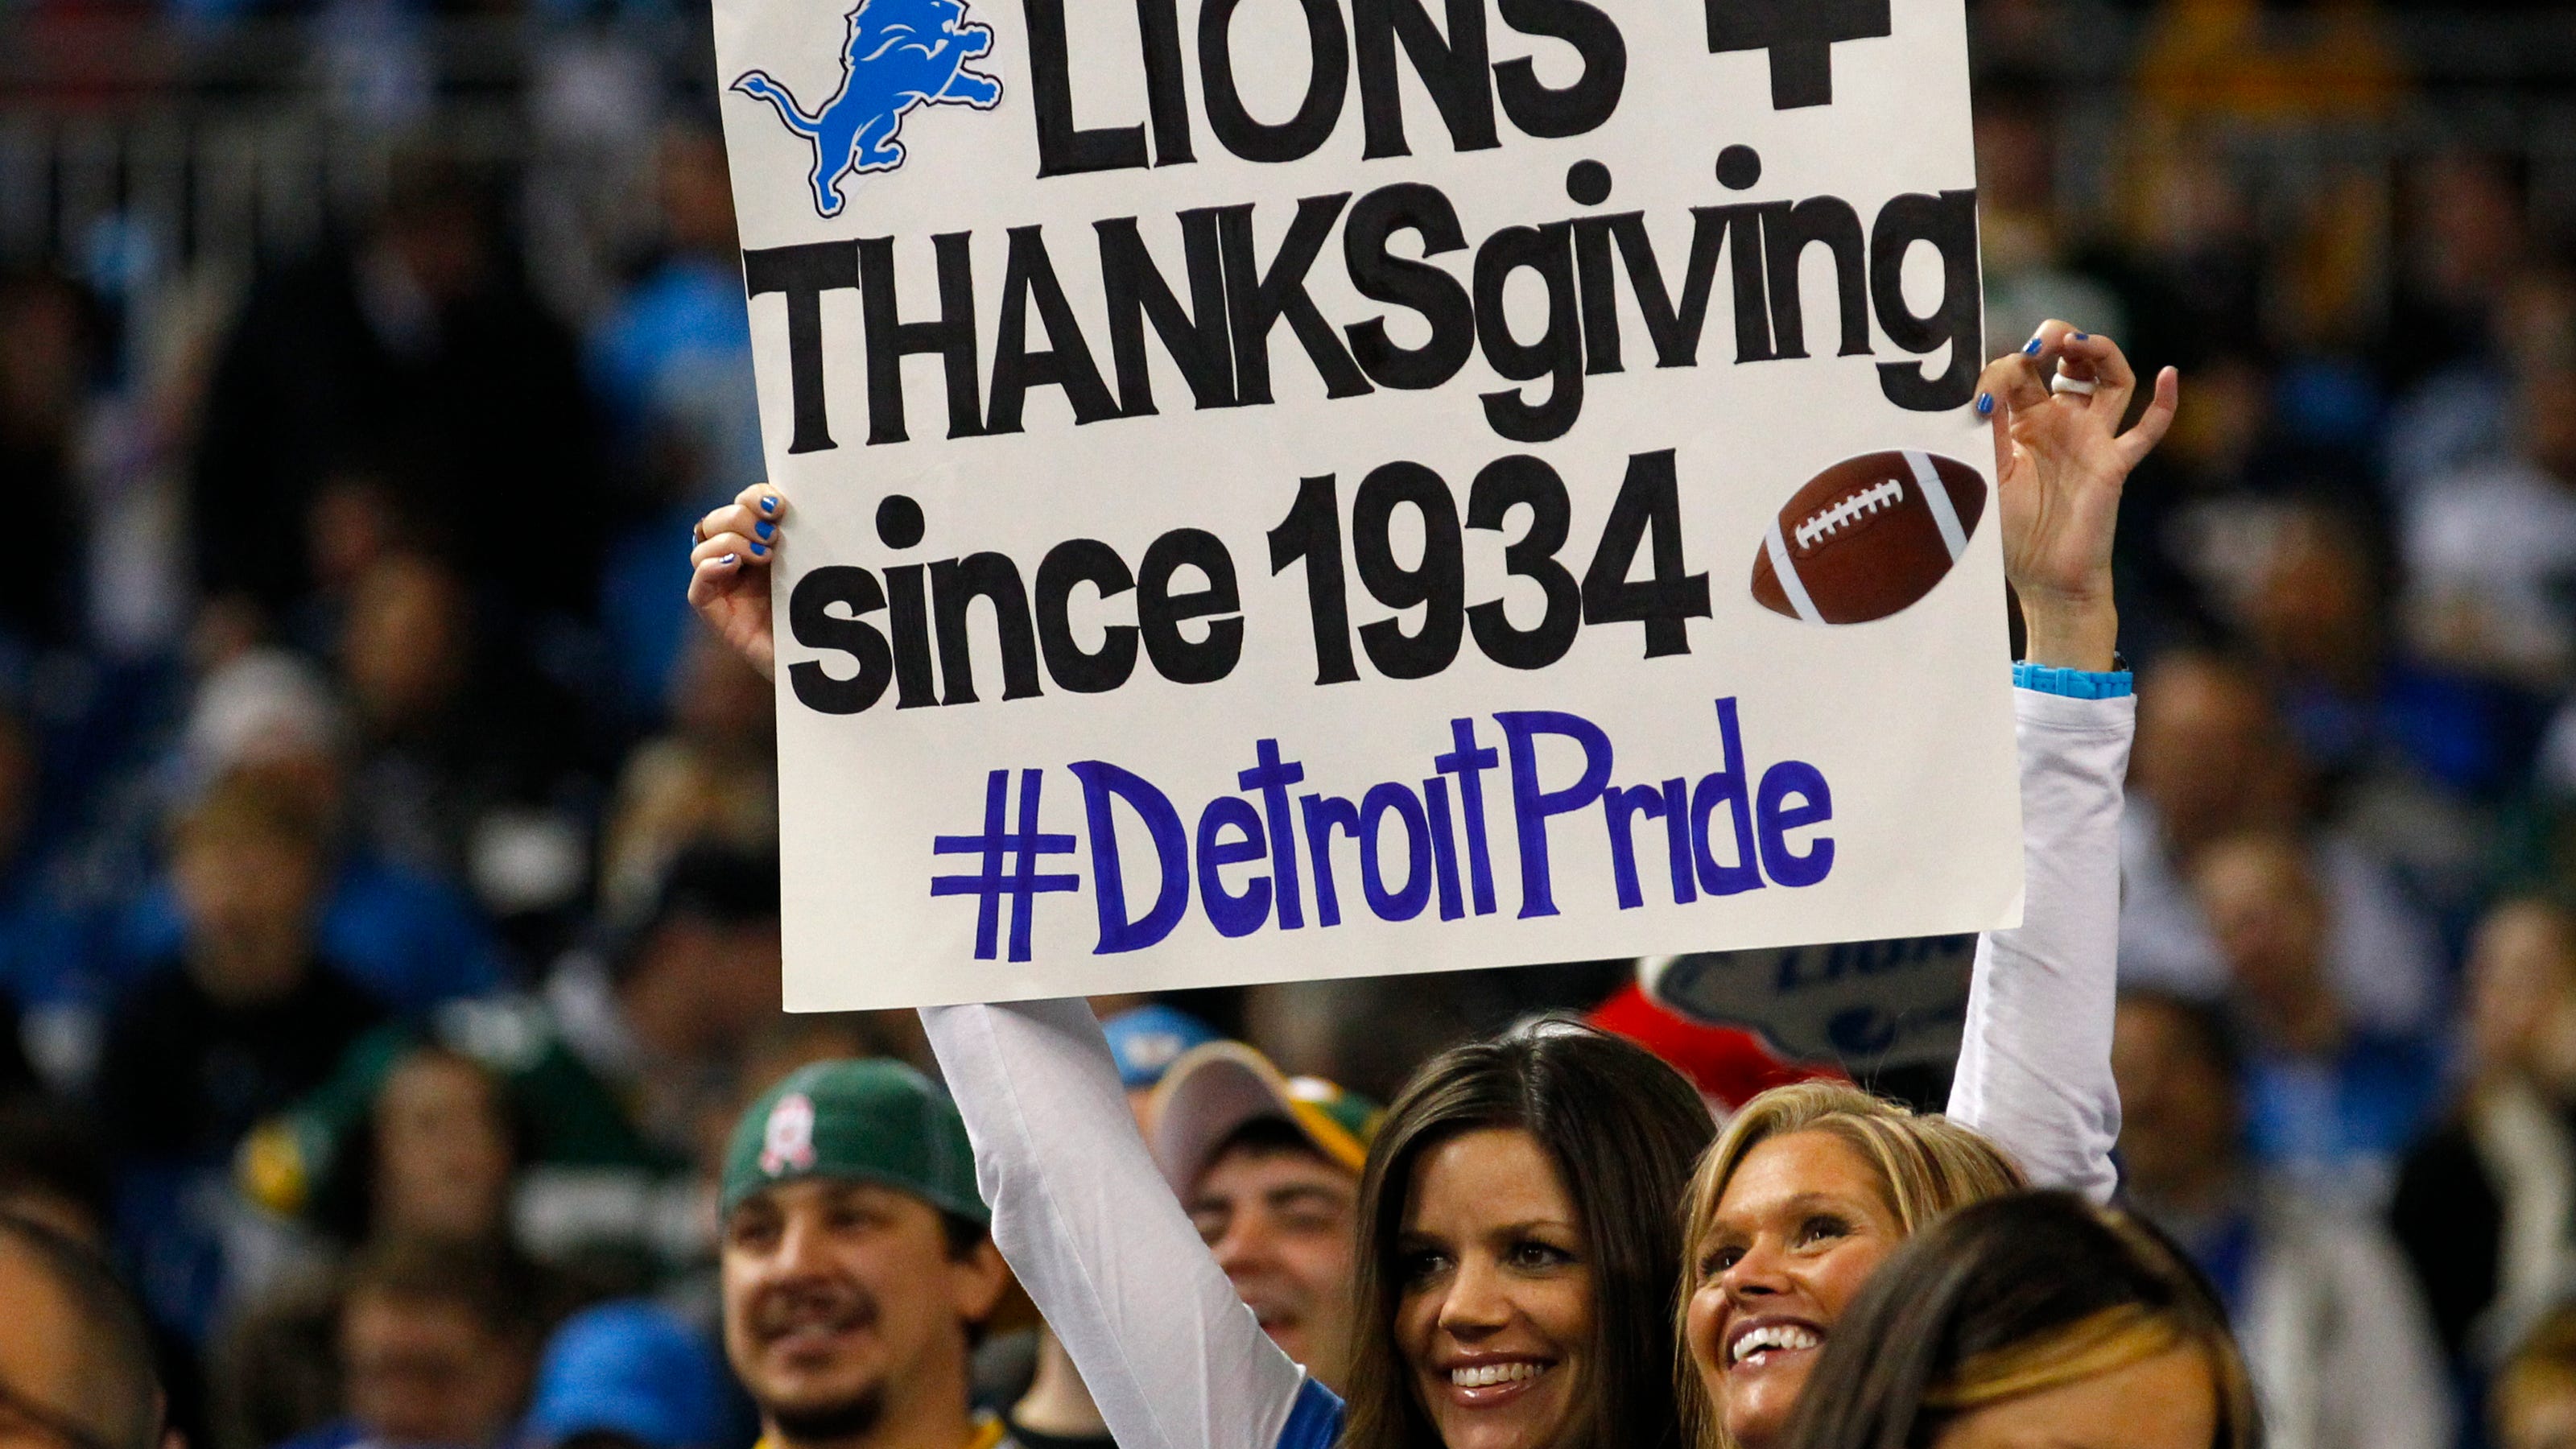 Home for the Holidays For my family, parade and Lions make Thanksgiving